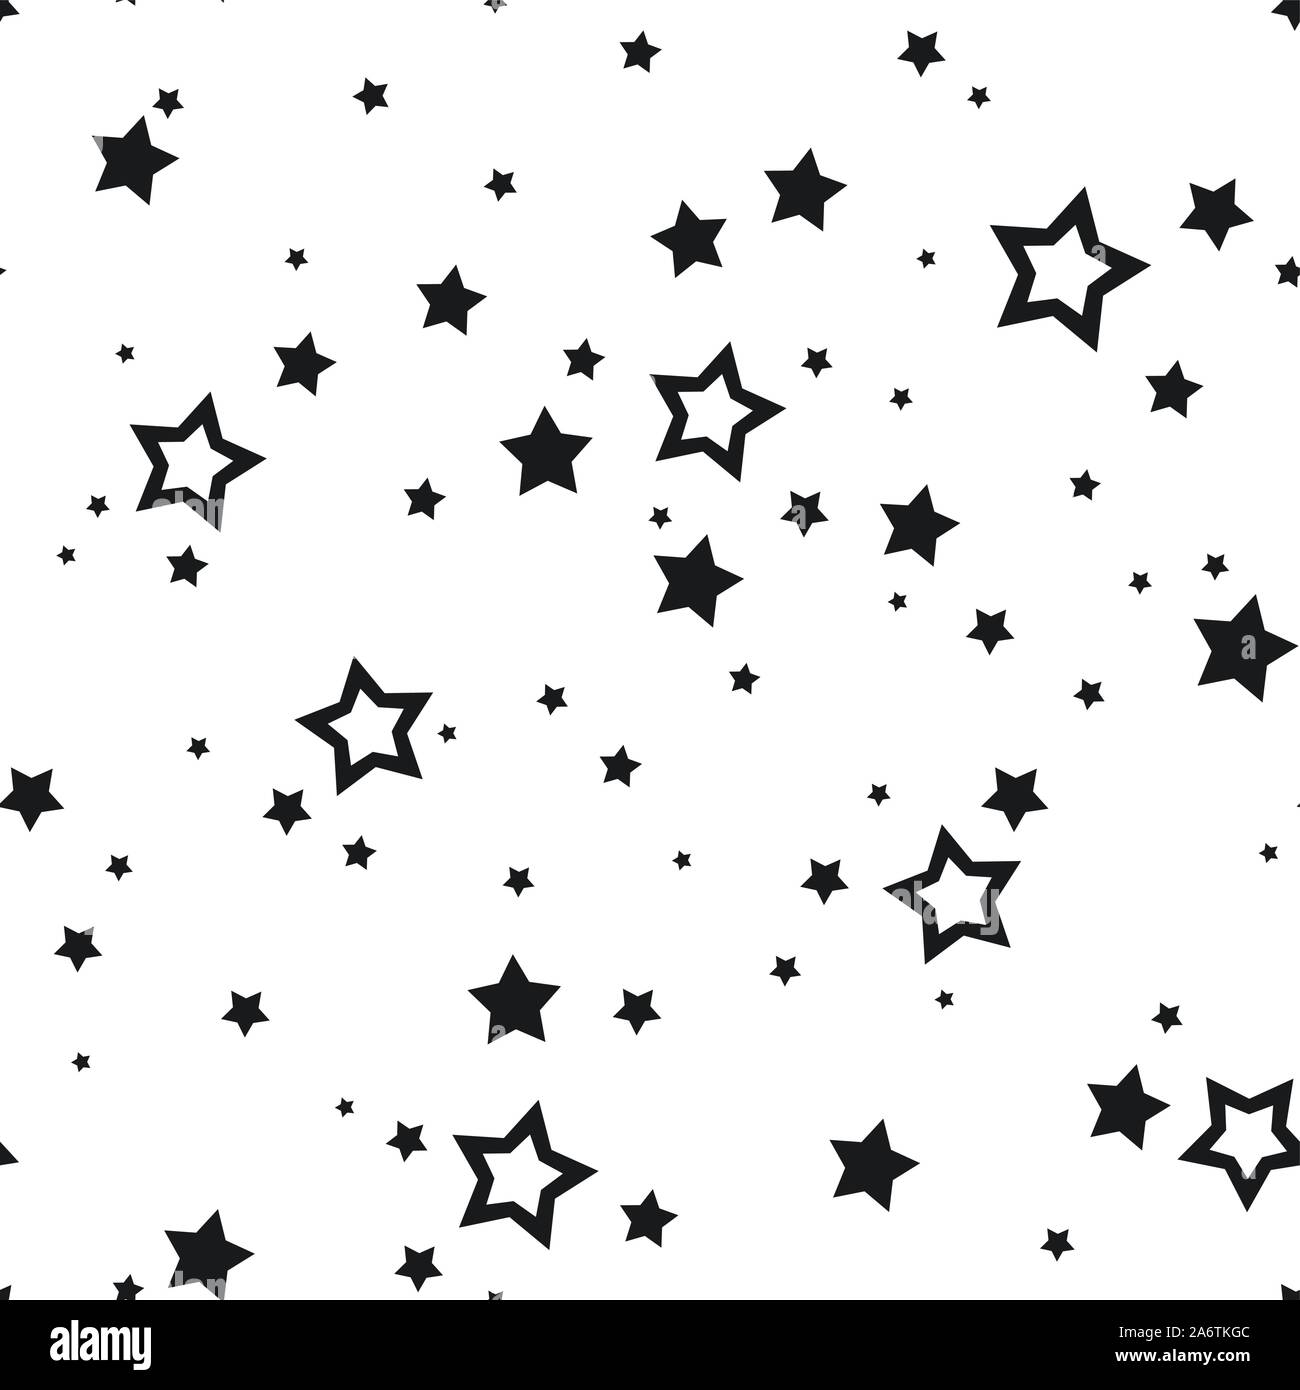 Vector seamless pattern with black stars on a white background. Stock Vector